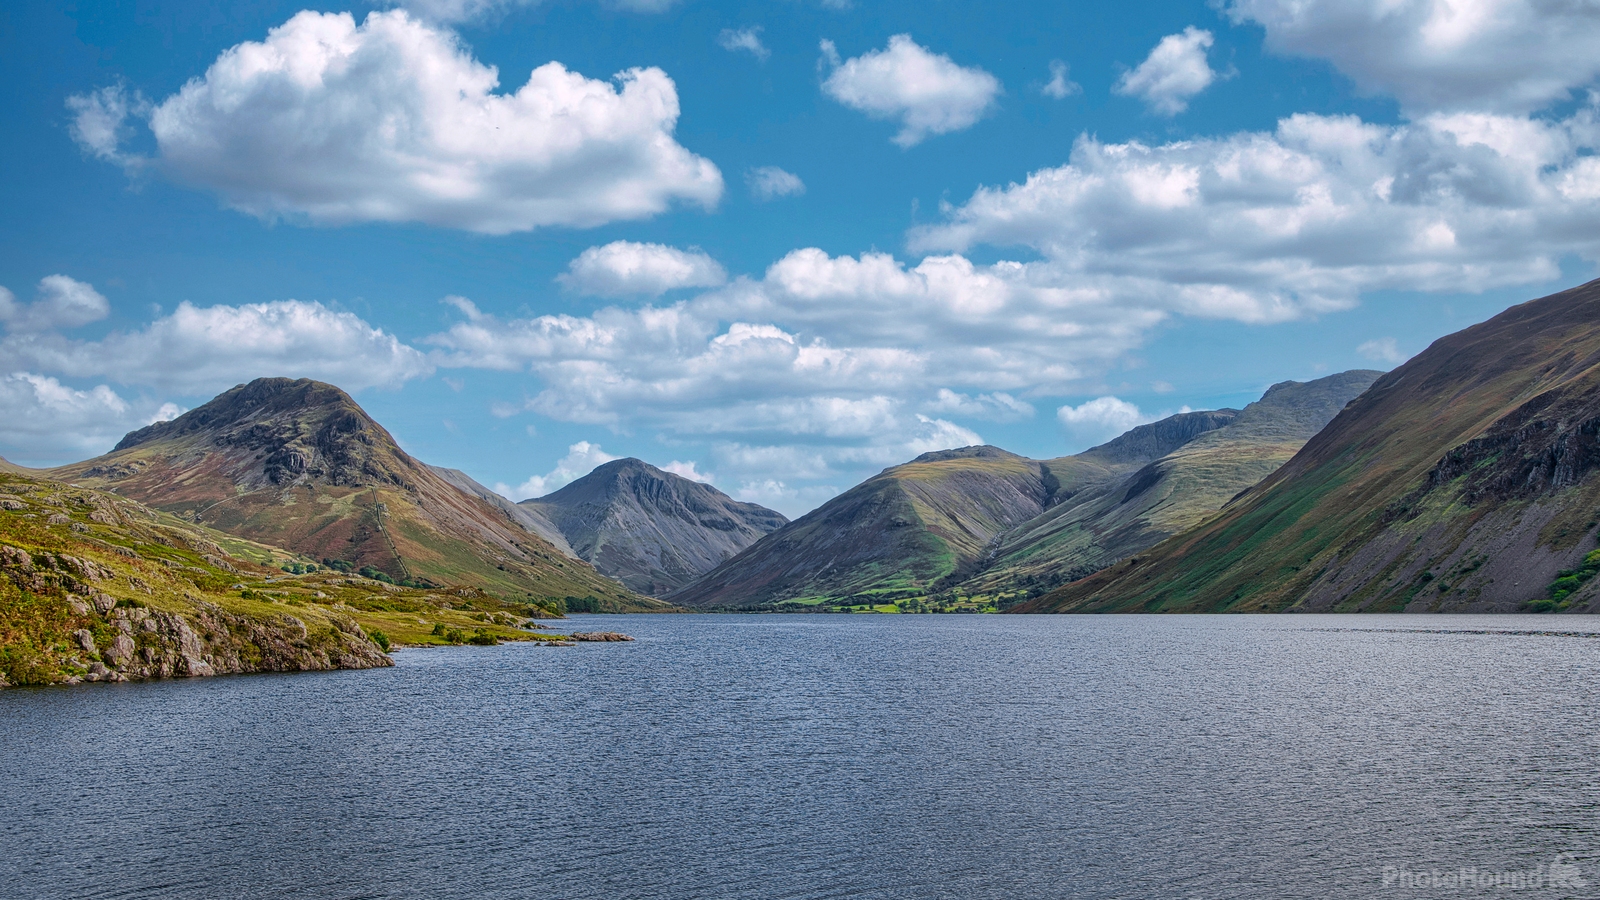 Image of Wast Water, Lake District by Tony Heale